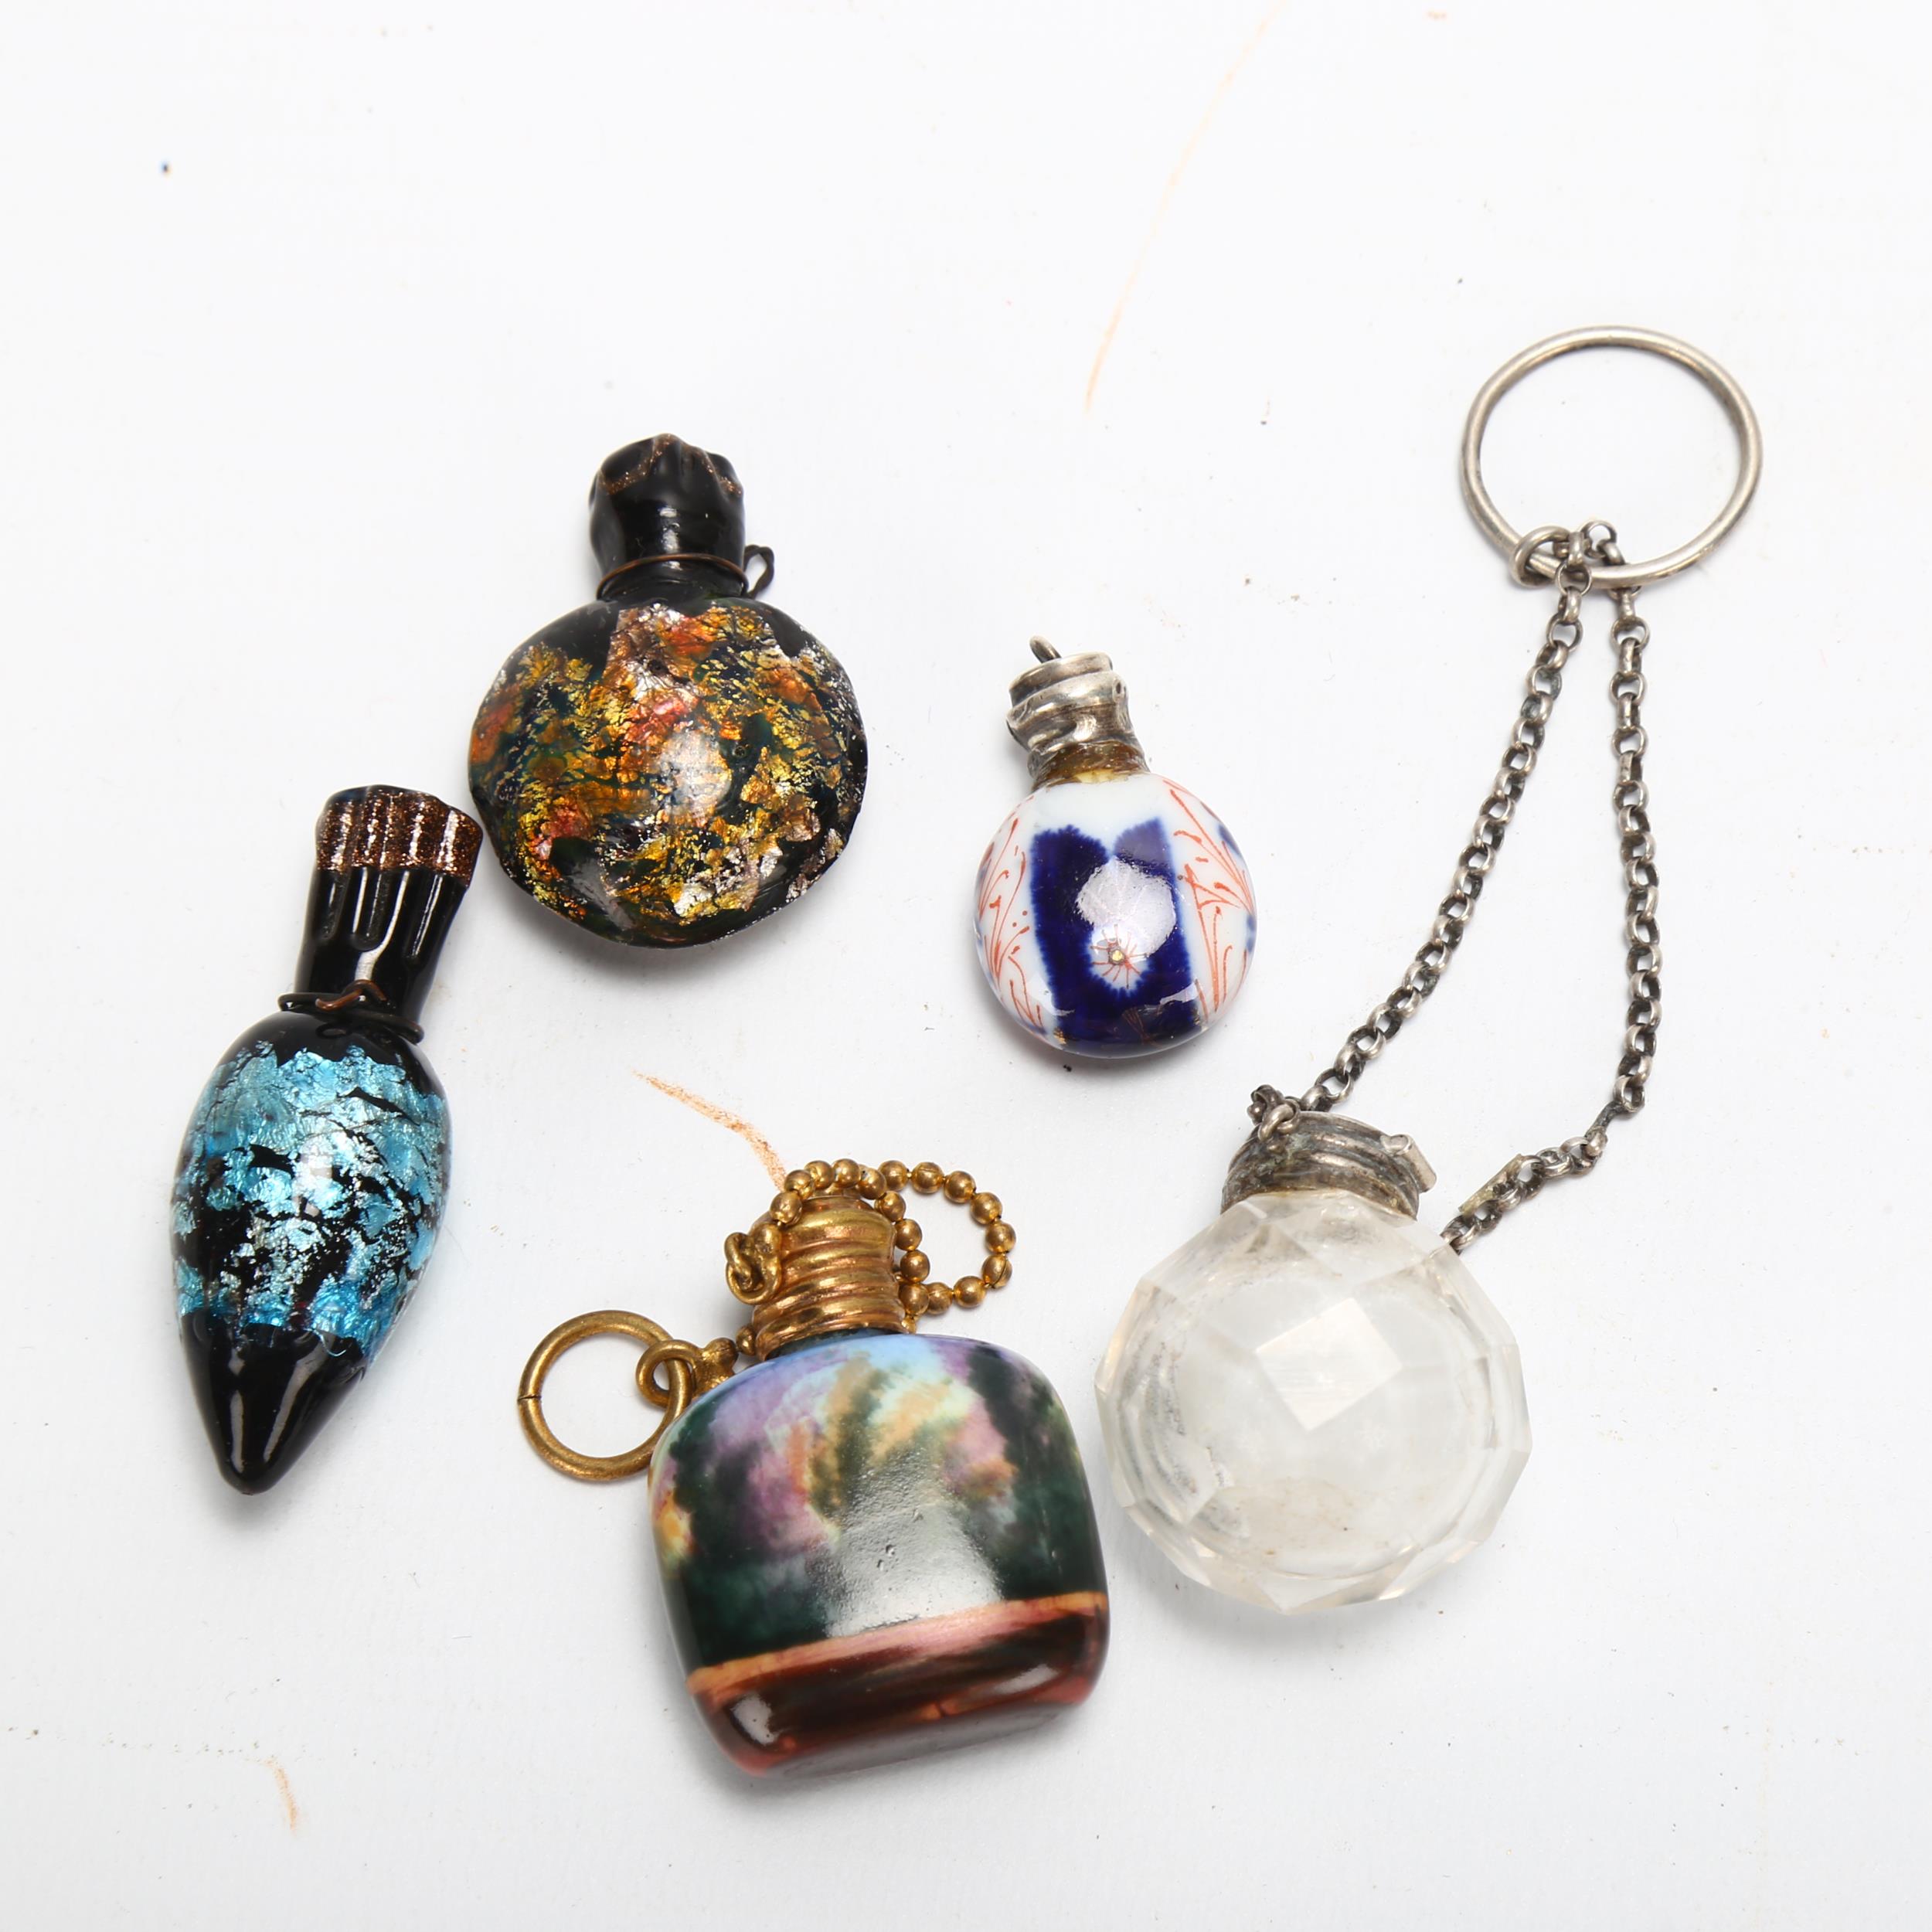 A group of miniature porcelain enamel and glass pendant perfume flasks (5) - Image 2 of 3